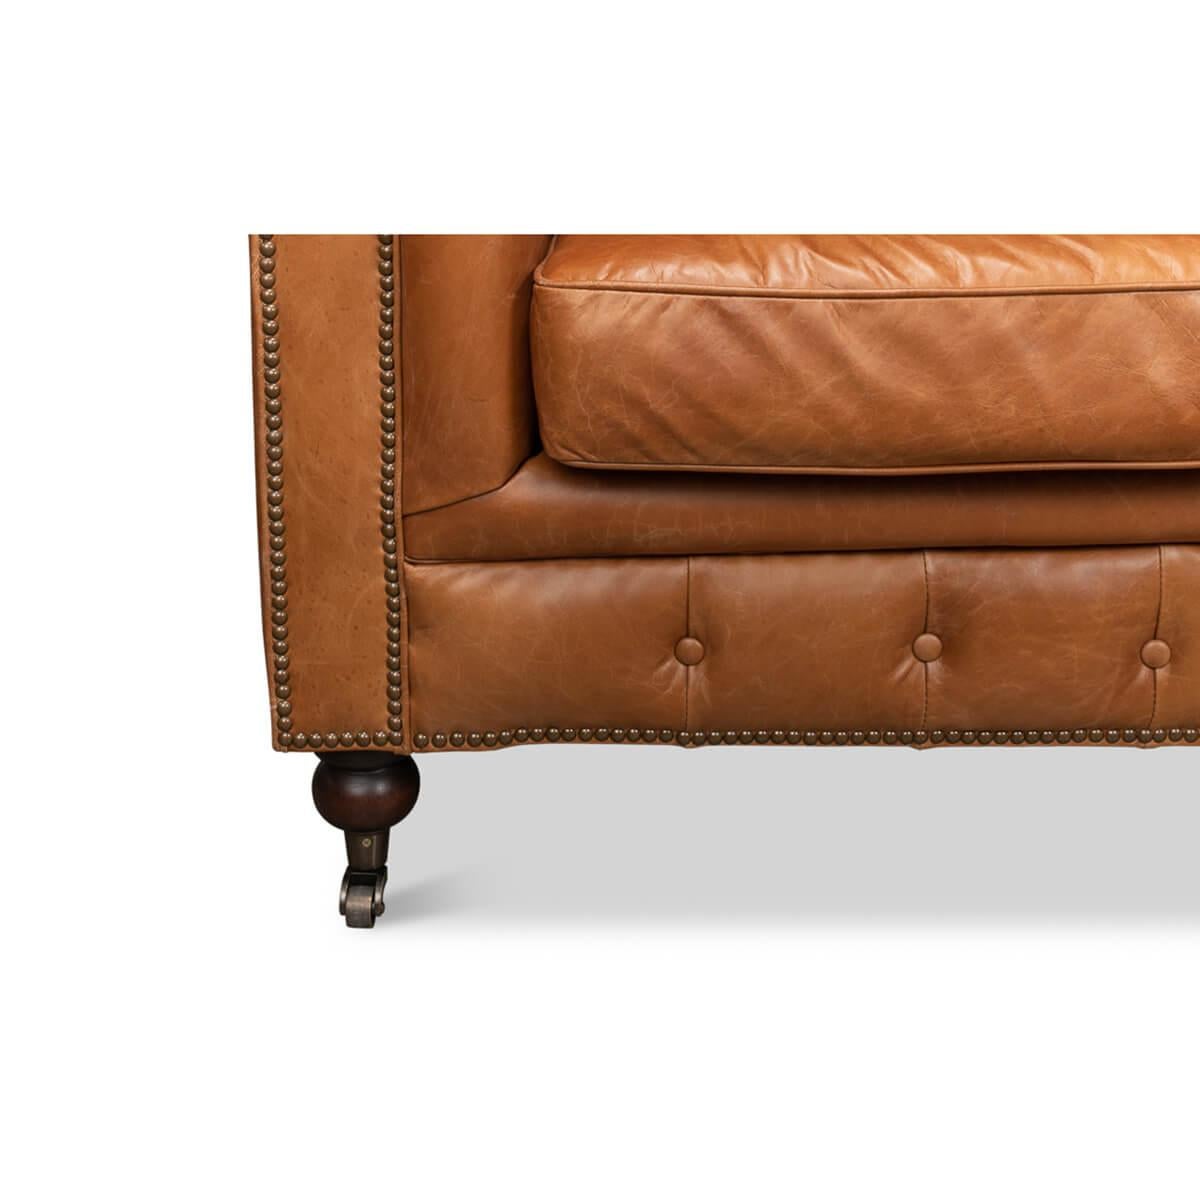 Vintage Style Classic Chesterfield Sofa - Vienna Brown Leather im Angebot 2